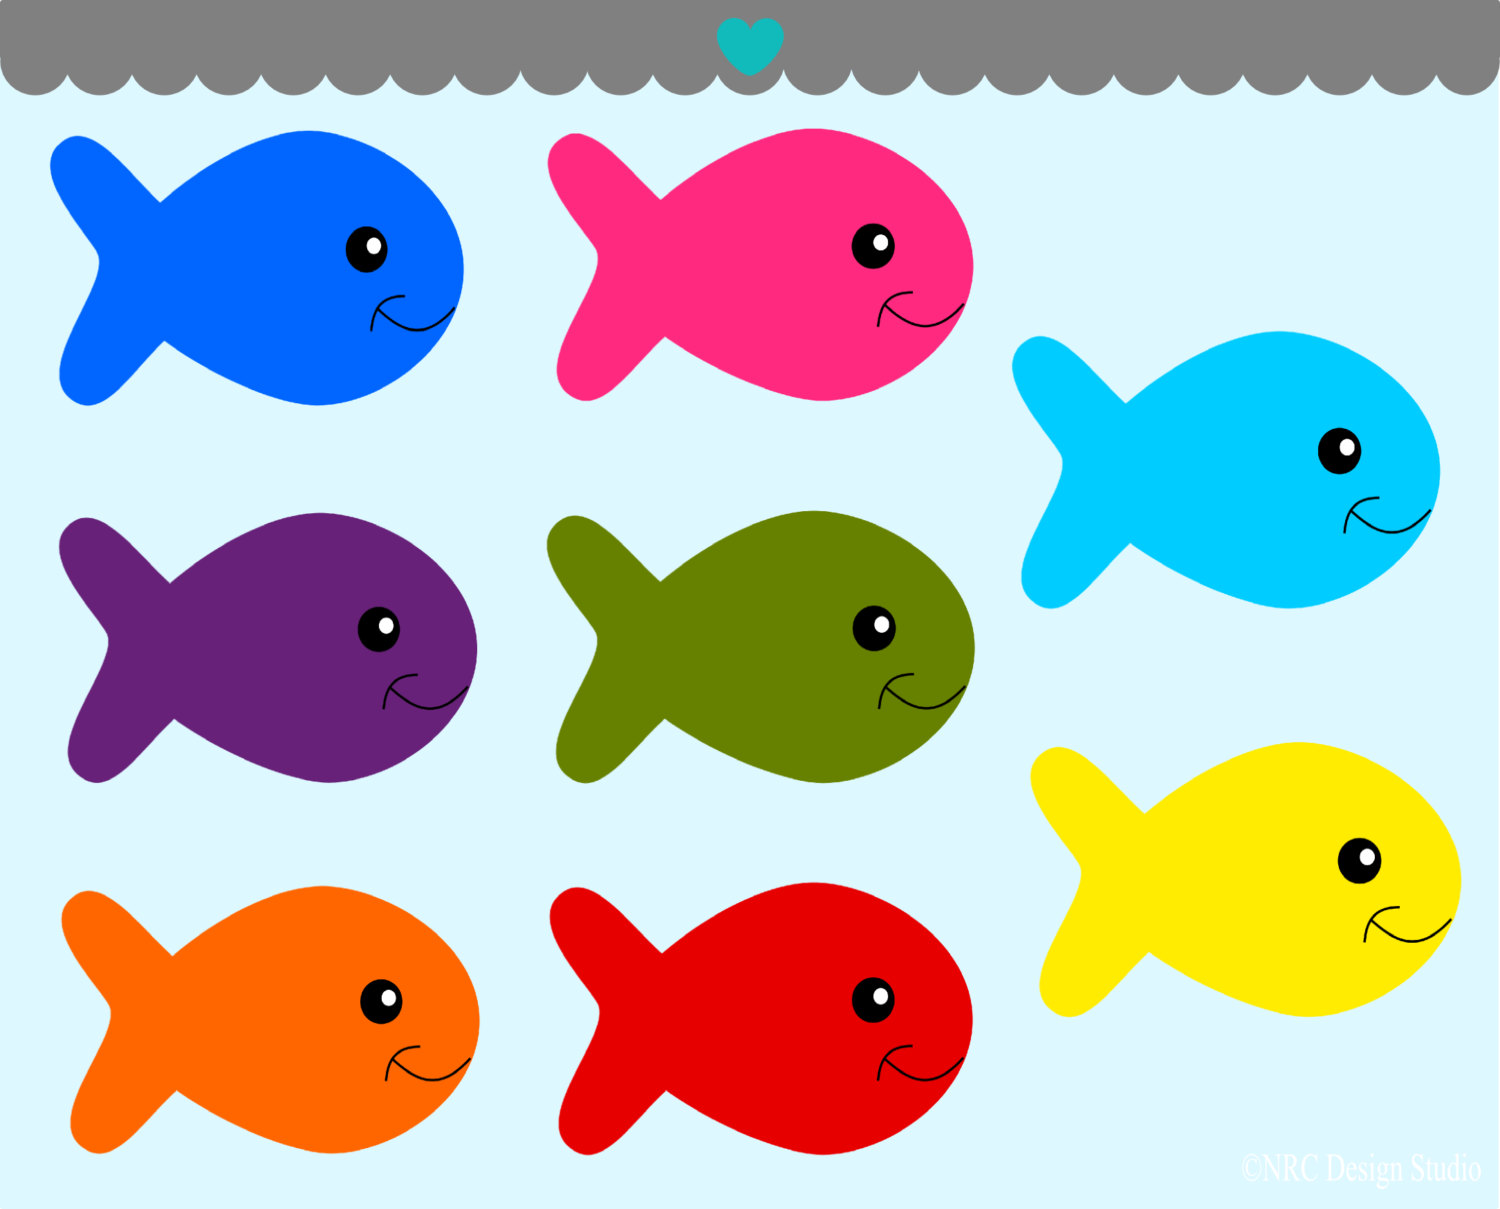 Coral Reef Fish Clipart Clipa